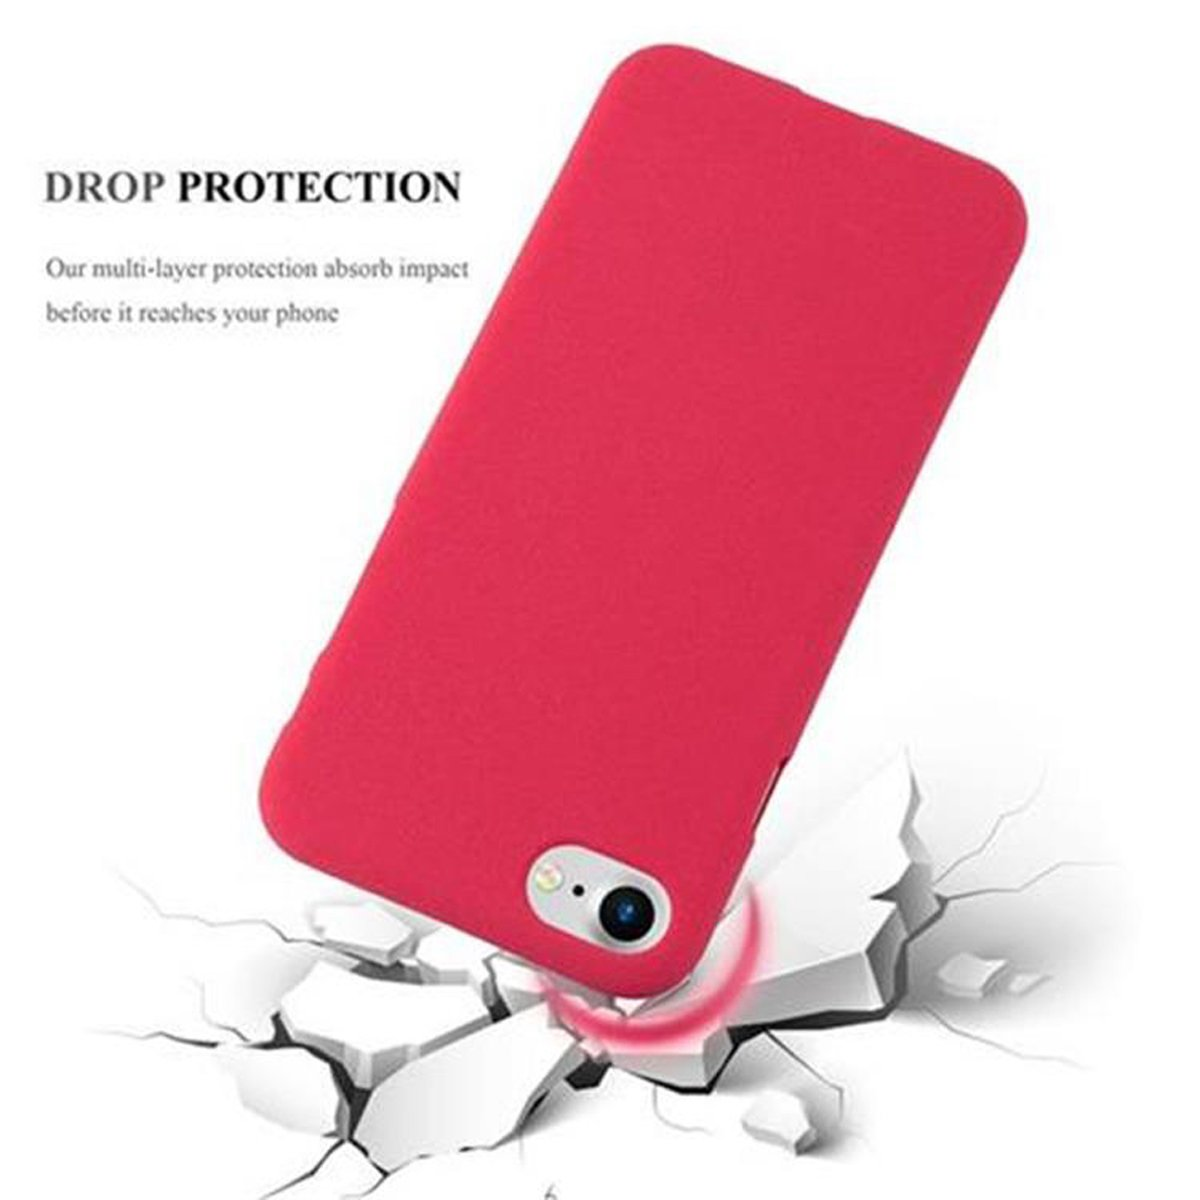 / / Apple, 7 CADORABO / Backcover, FROST 7S SE 8 Frosted iPhone ROT 2020, Schutzhülle, TPU